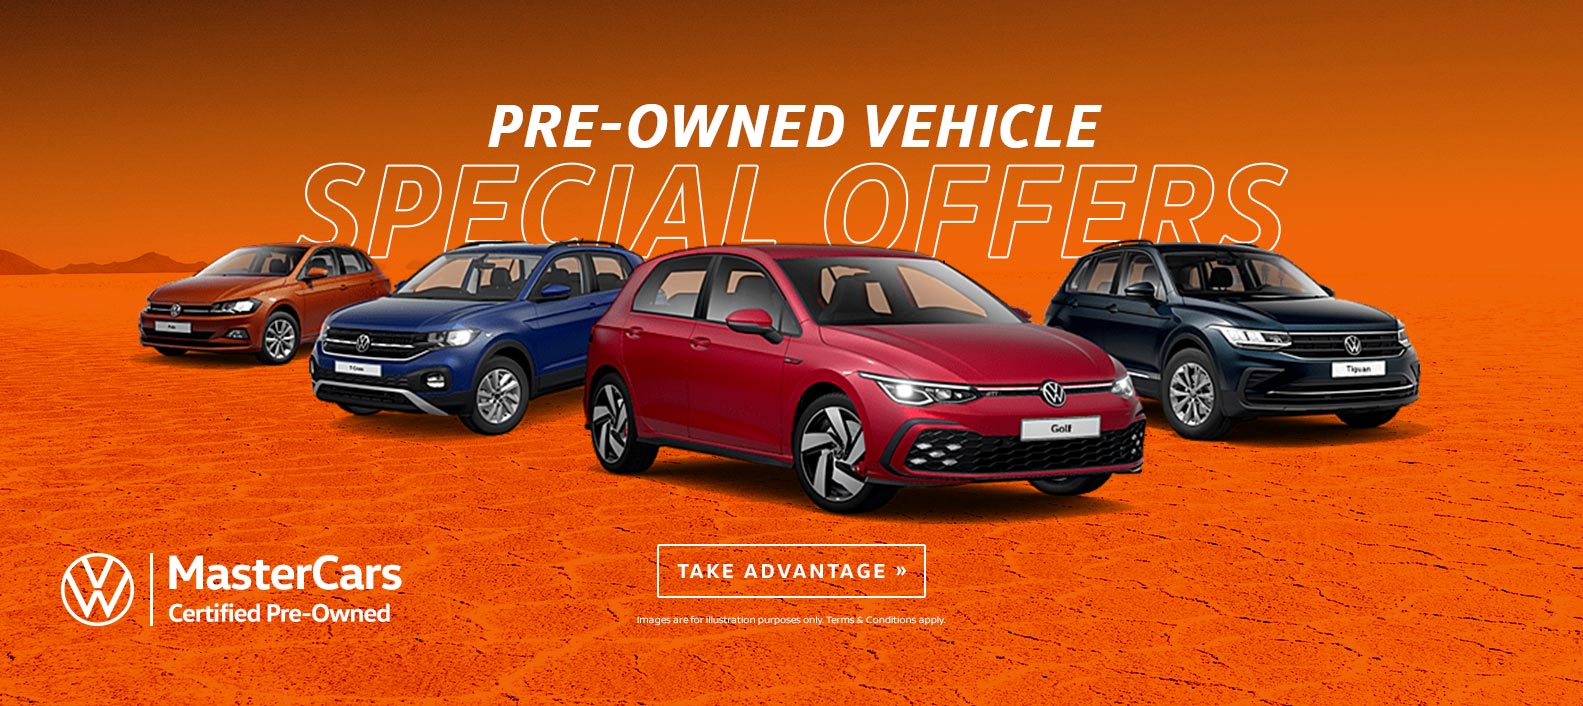 Pre-owned Vehicle Special Offers